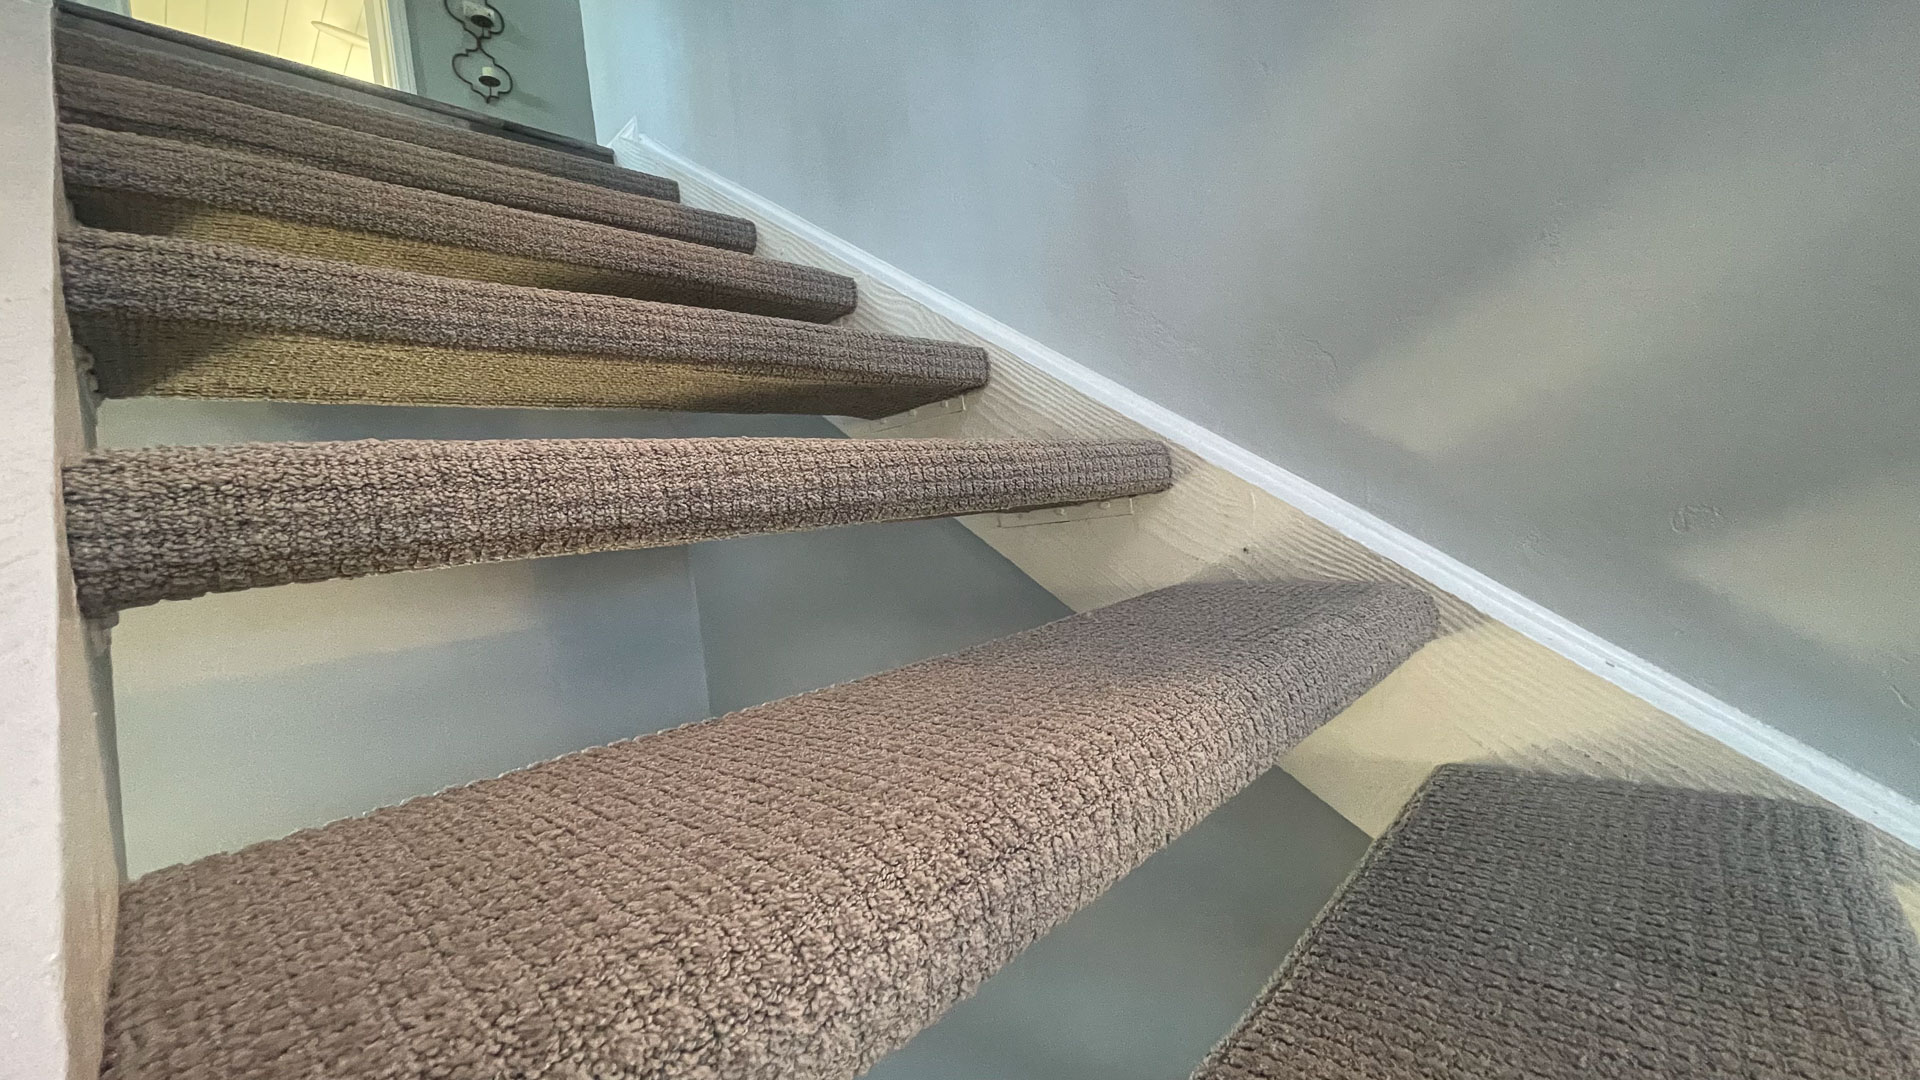 Close-up view of wrap-around carpet on stairs